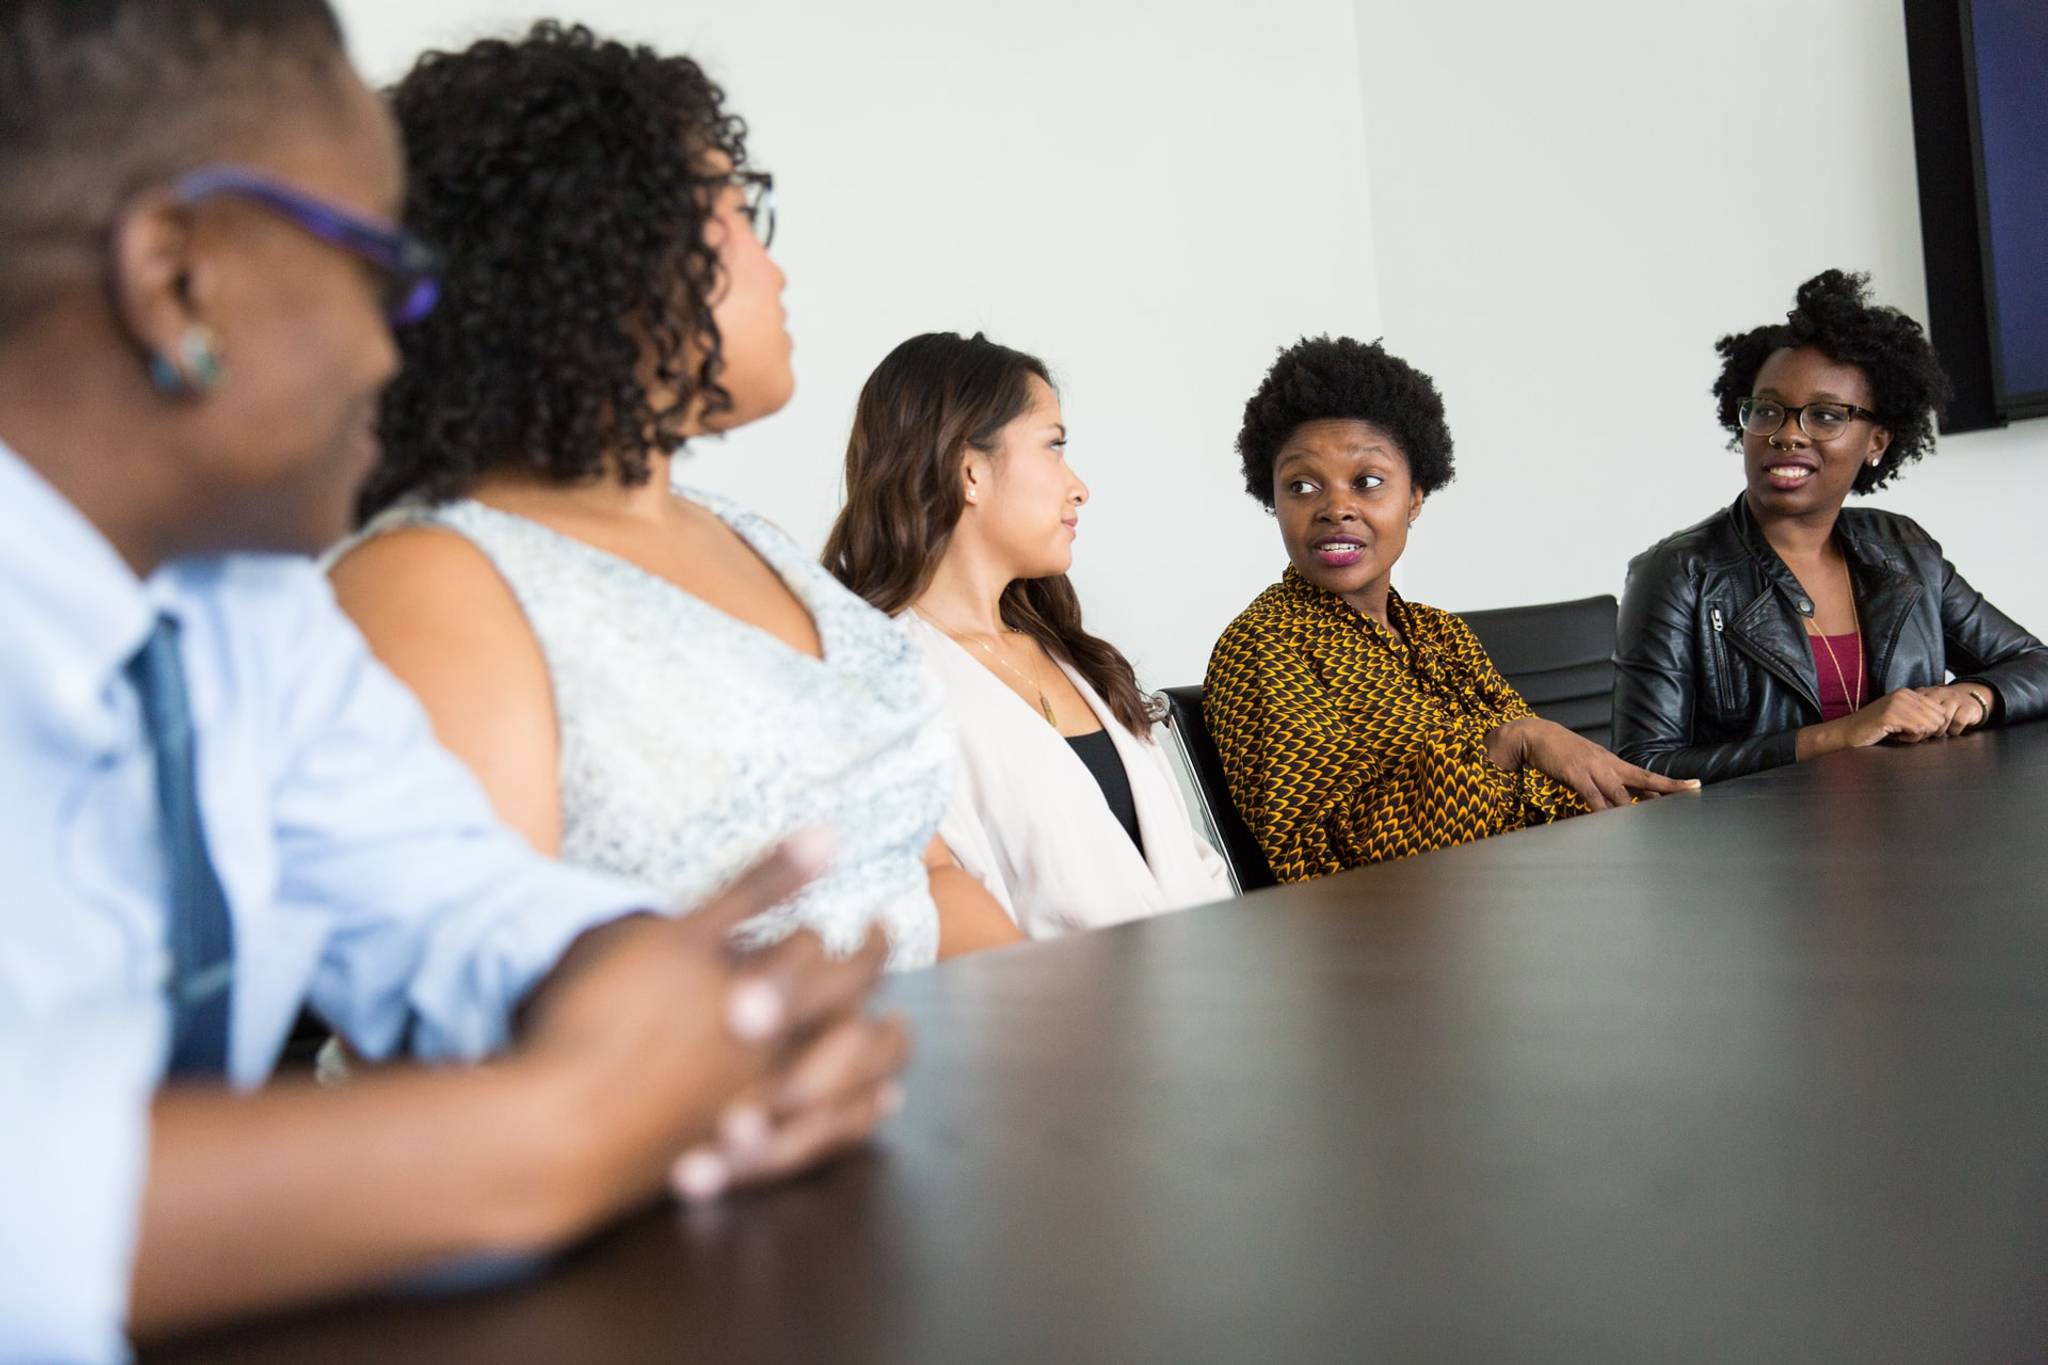 Corporate culture is failing driven multicultural women